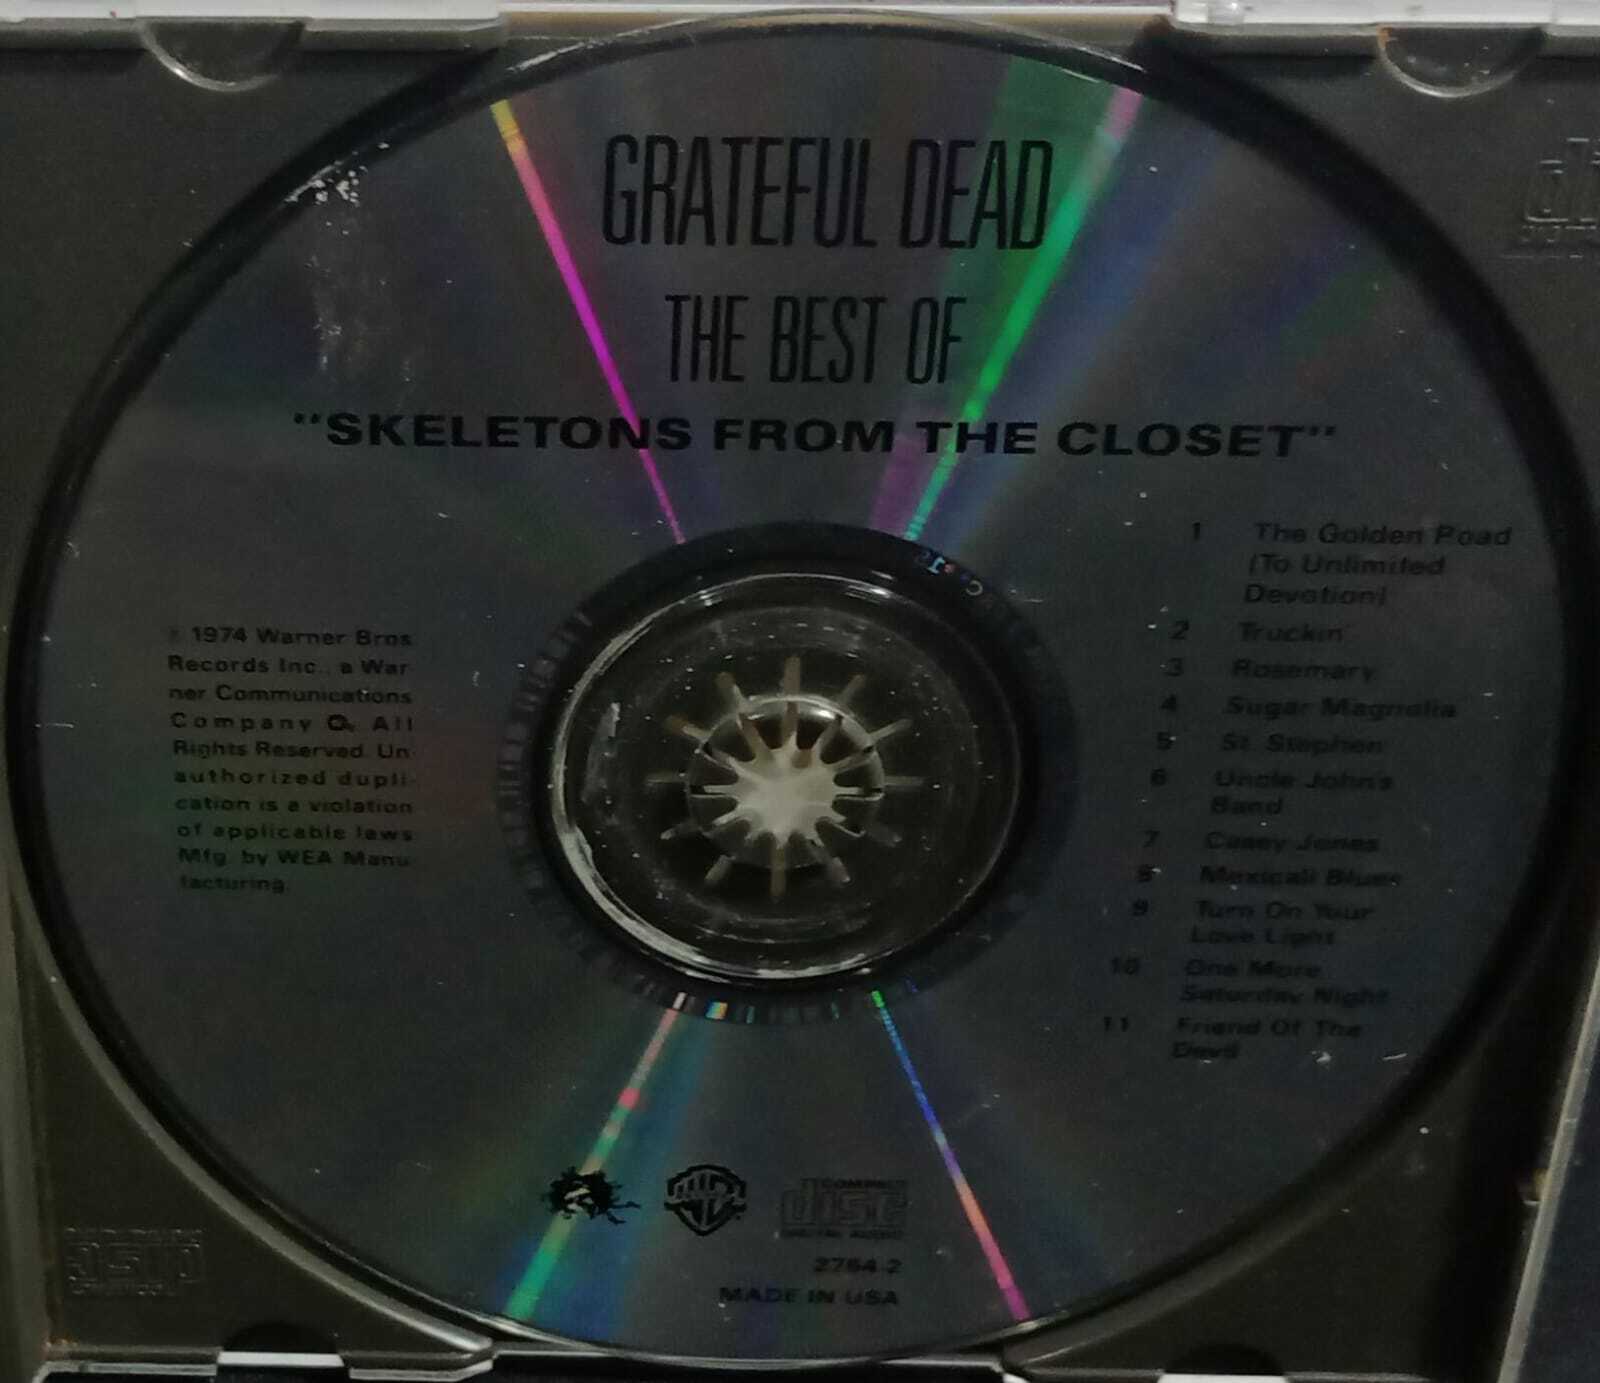 CD - Grateful Dead The - Skeletons from the Closet The Best of (USA)